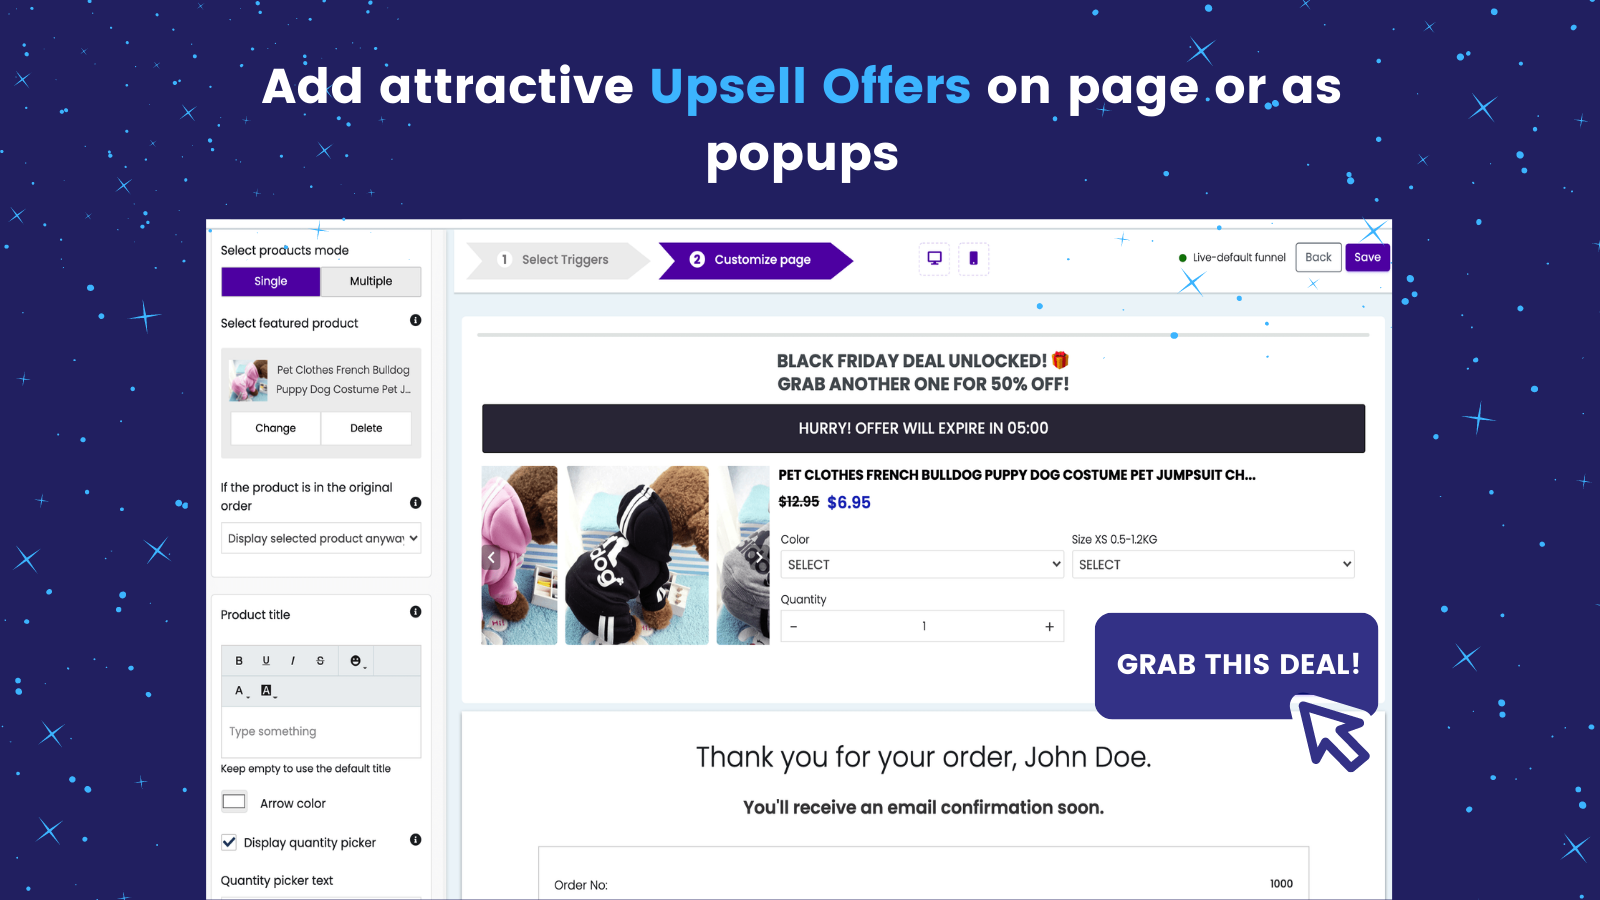 Add attractive upsell offers on page or as popups.